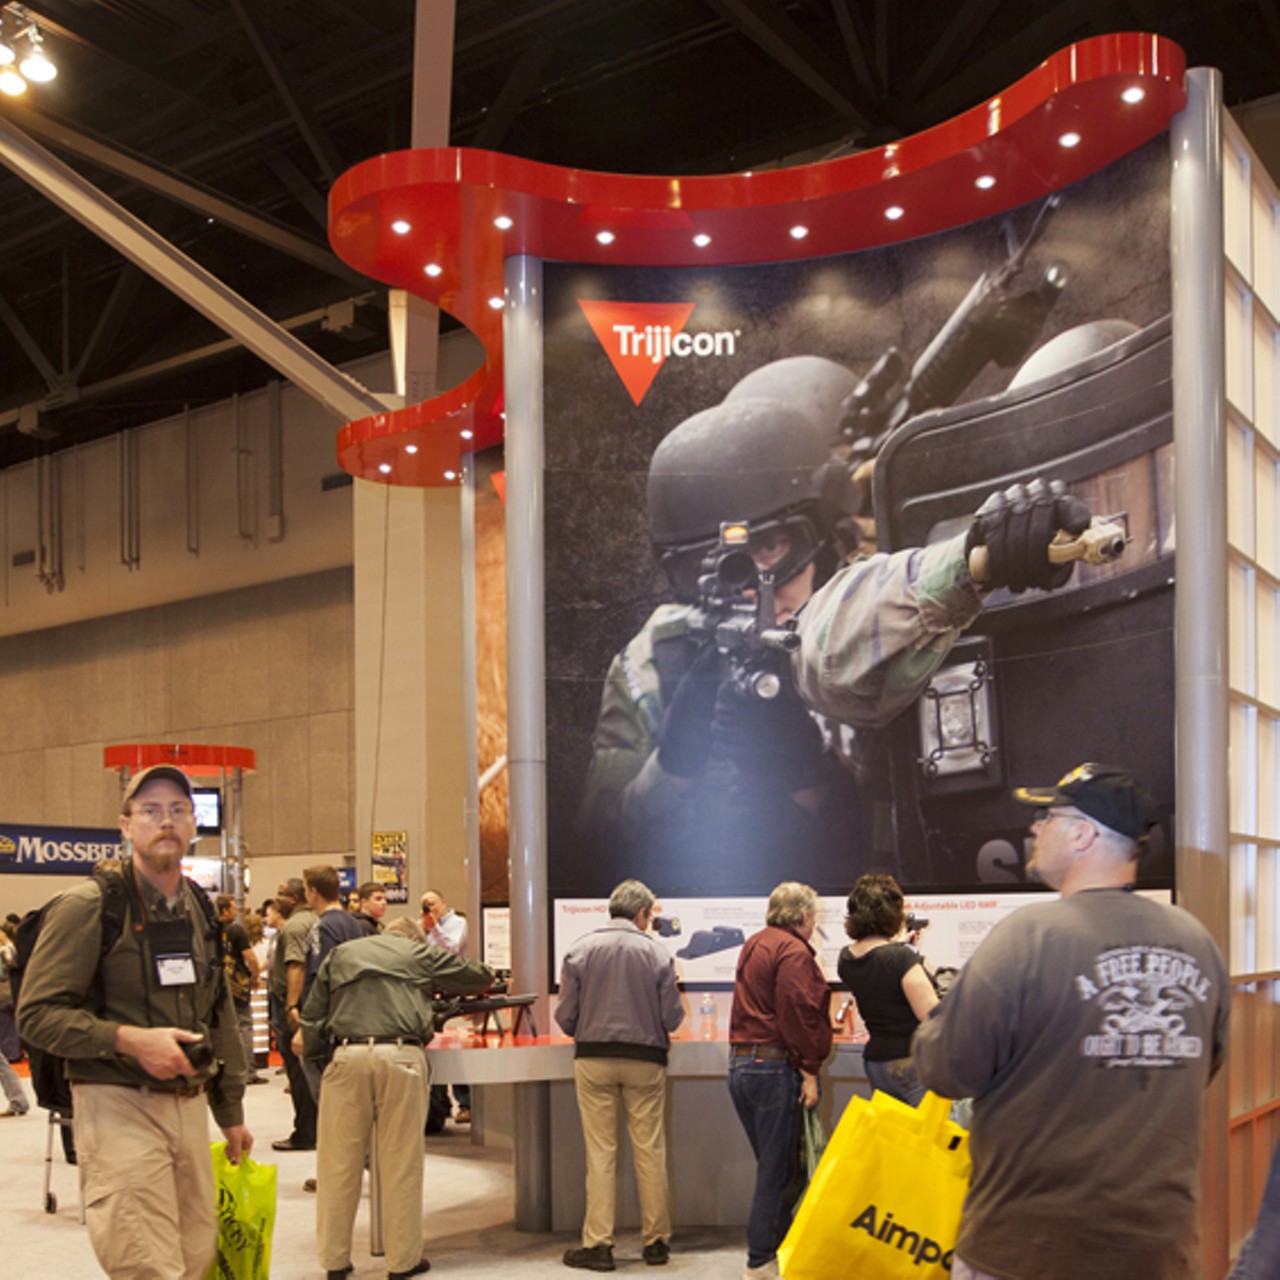 Scenes from the NRA convention in St. Louis